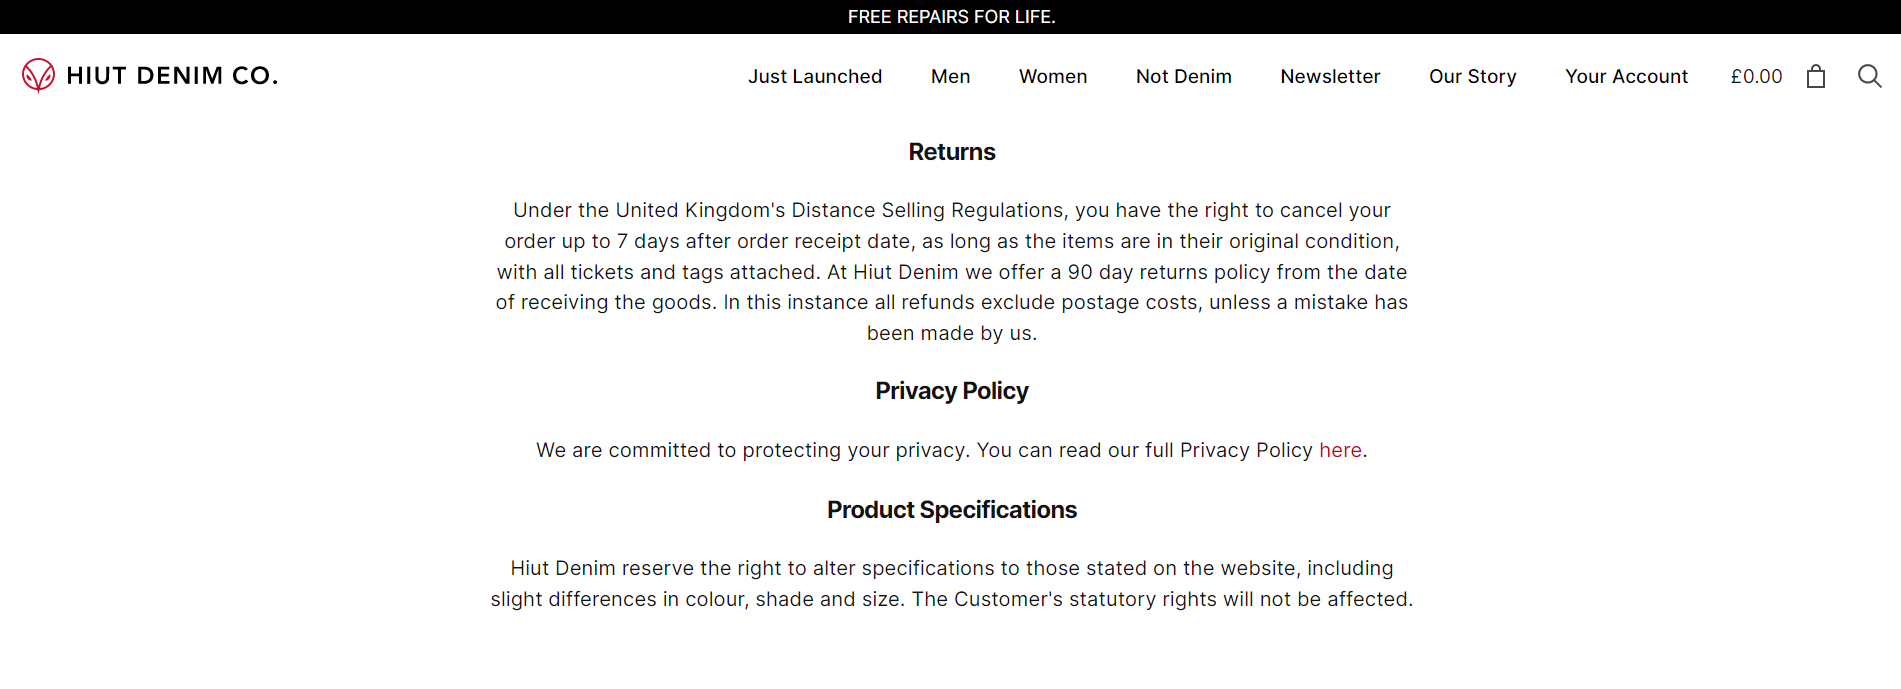 Shopify return policy examples for Clothing and Fashion Stores – Hiut Denim Co